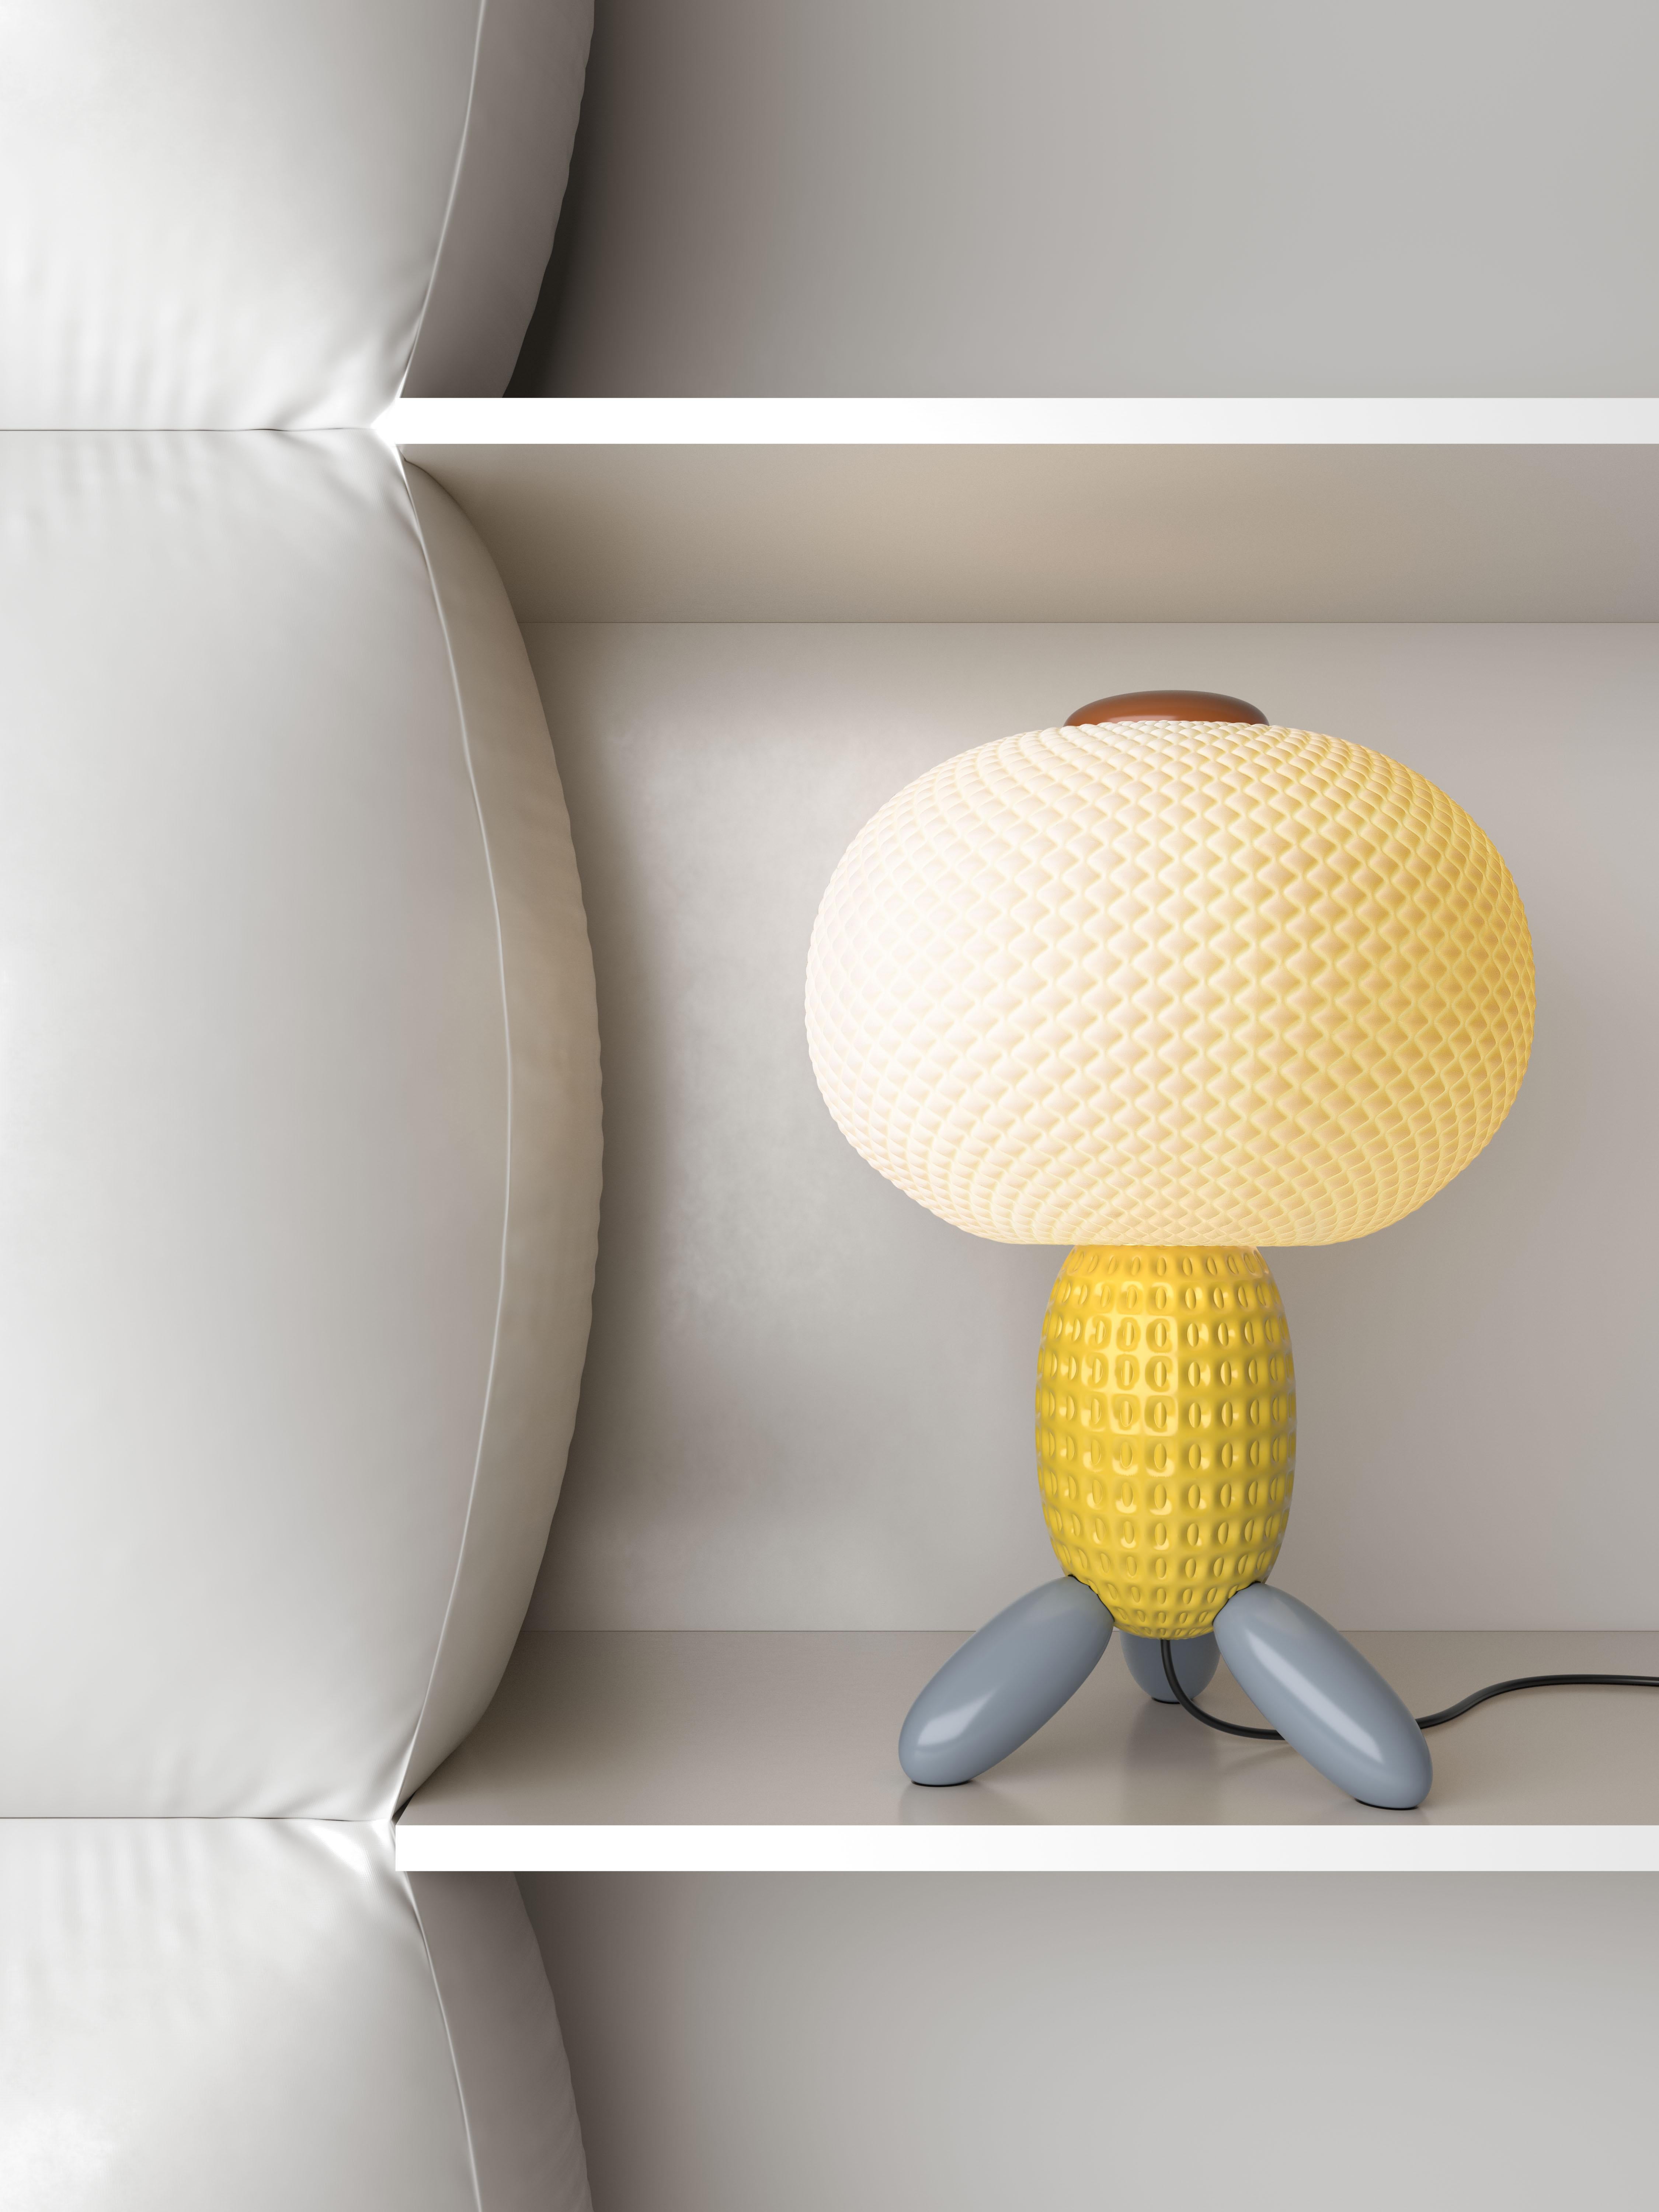 Porcelain table lamp from the Soft Blown collection, designed for Lladró by Luca Nichetto. This porcelain table lamp, from the Soft Blown collection, is one of the first designs made for Lladró by Nichetto Studio, the prestigious Stockholm-based